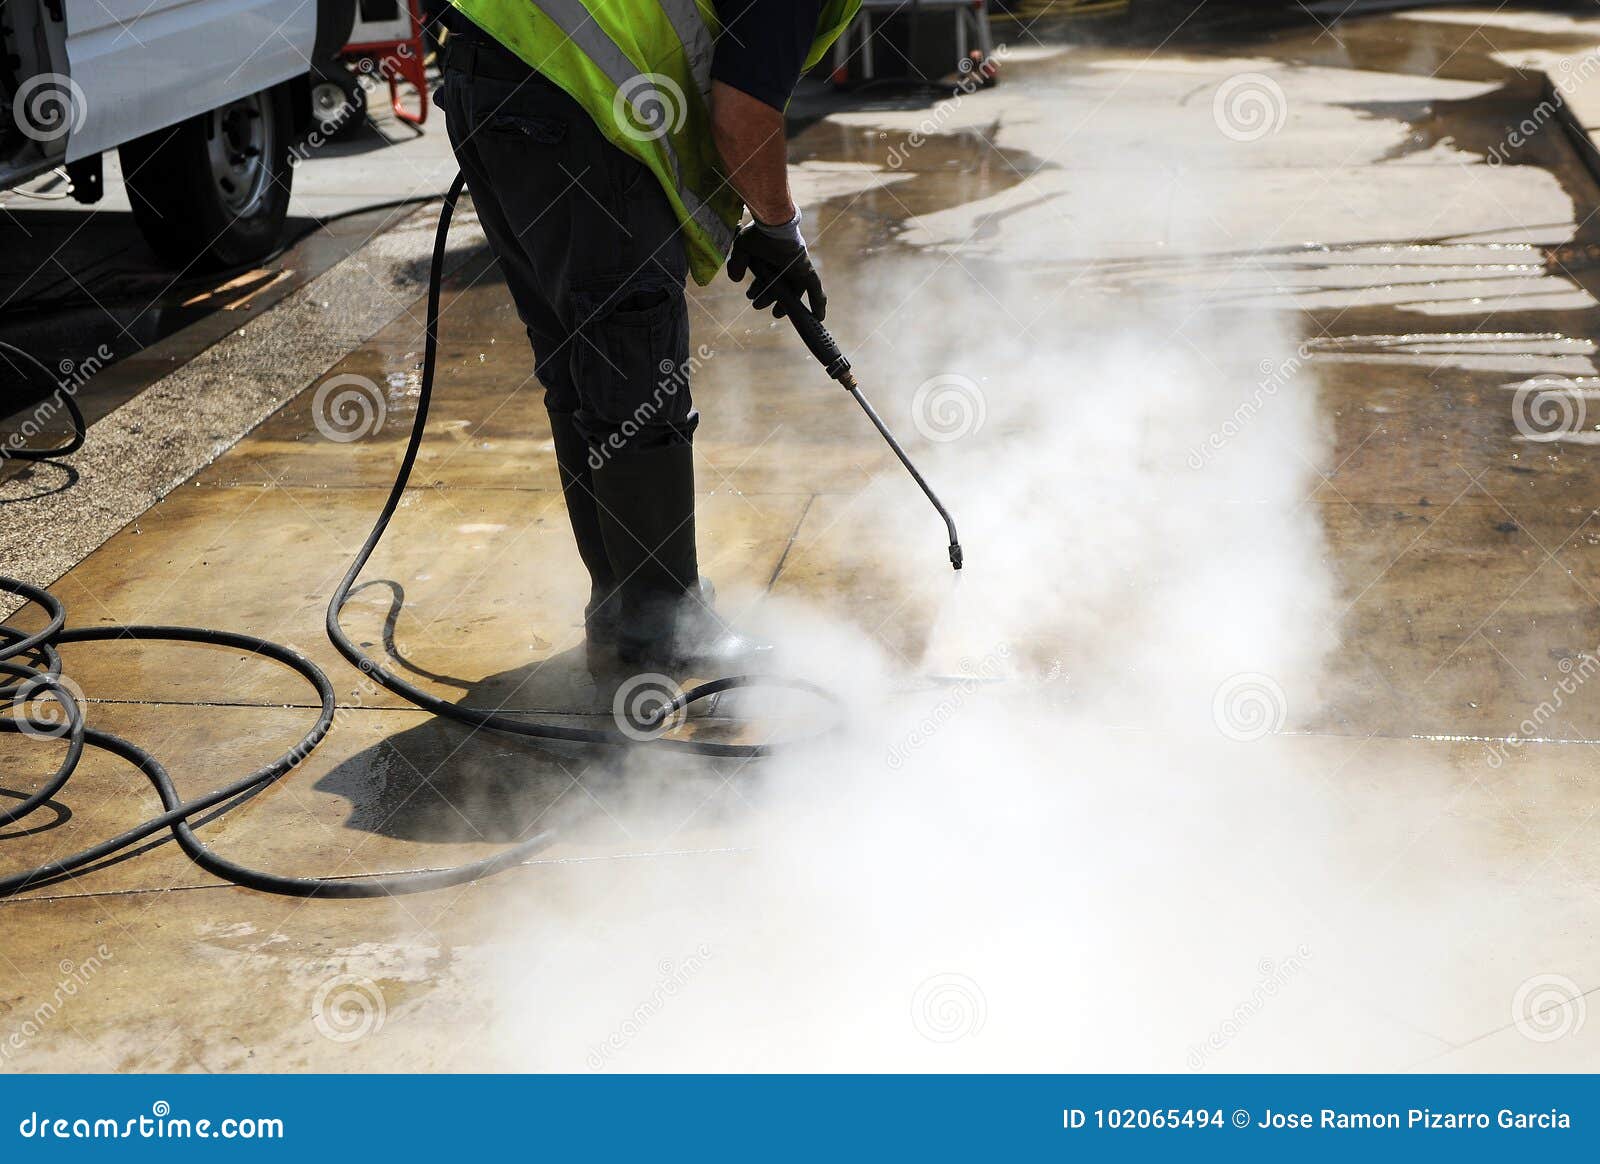 disinfection coronavirus, cleaning the pavement of the street with pressurized water